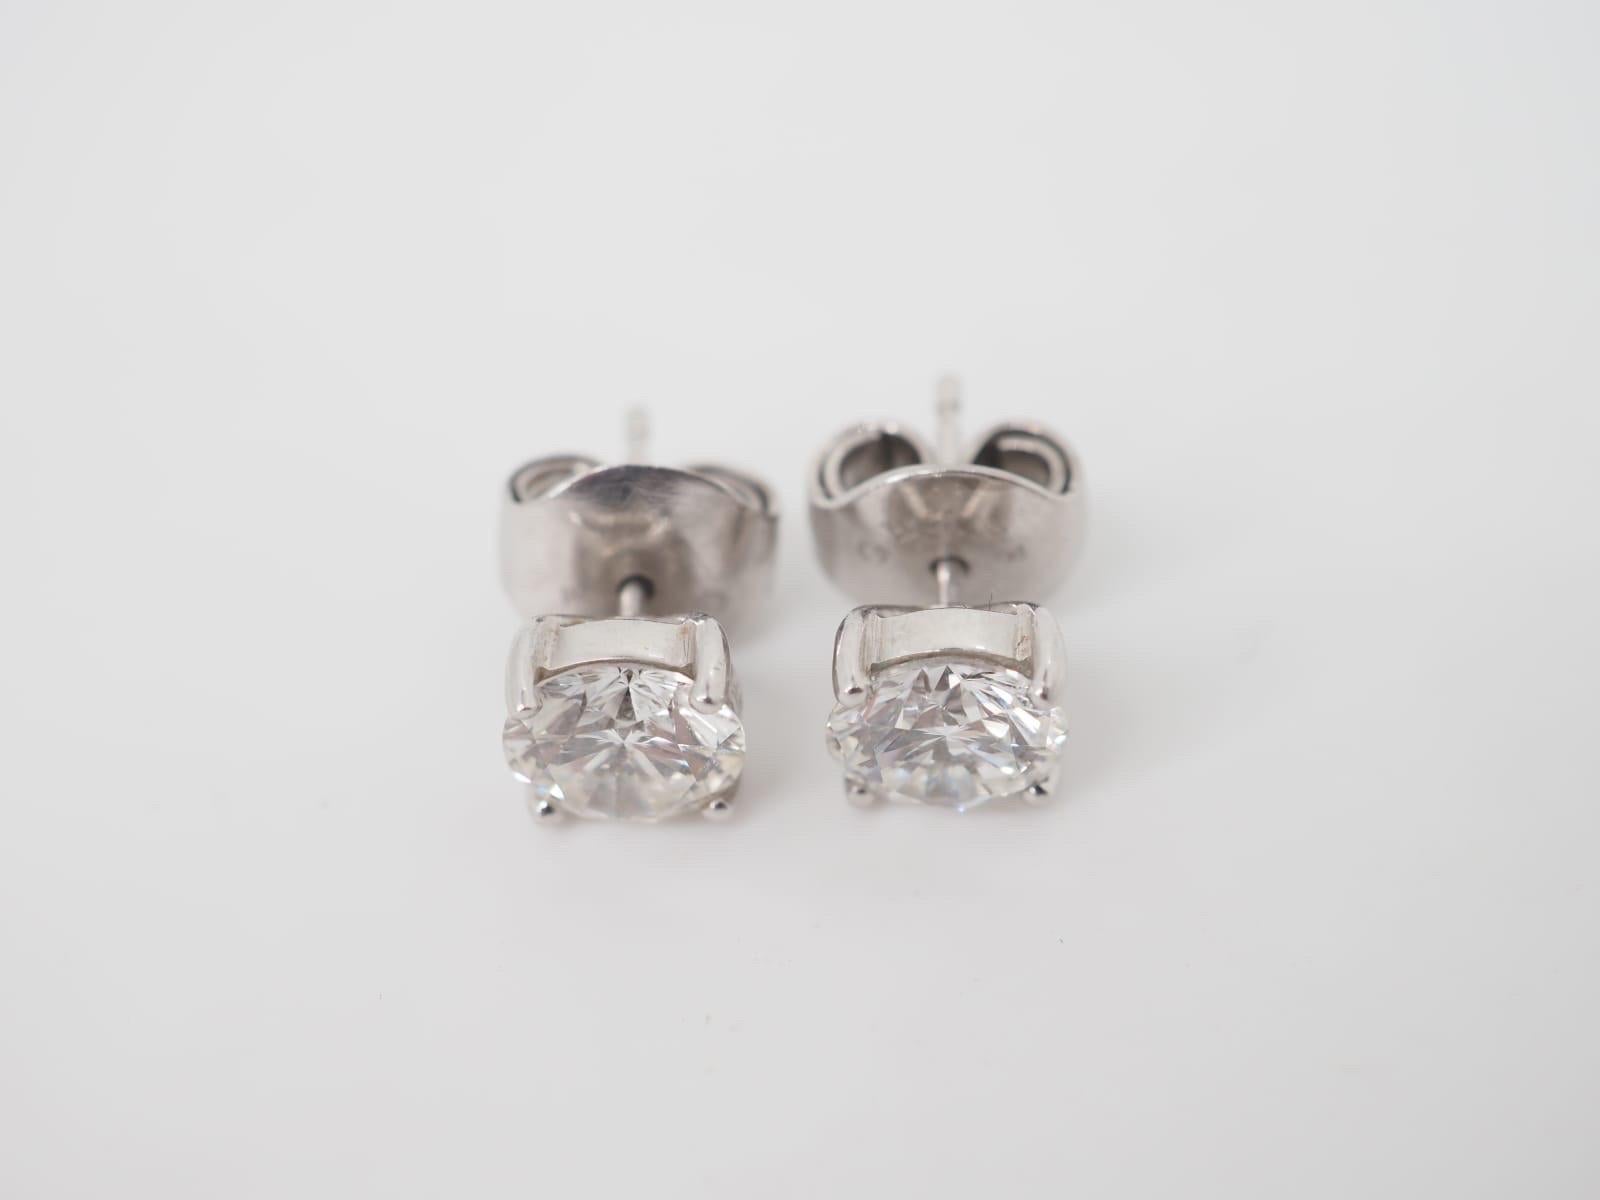 Graff diamond stud earrings crafted in 18K White Gold featuring the diamonds with a total weight 3 cts E/VS1. These beautiful earrings feature two Graff 1.5 ct E/VS1 Round Brilliant Cut Diamonds crafted in 18k White Gold stud settings with the slide